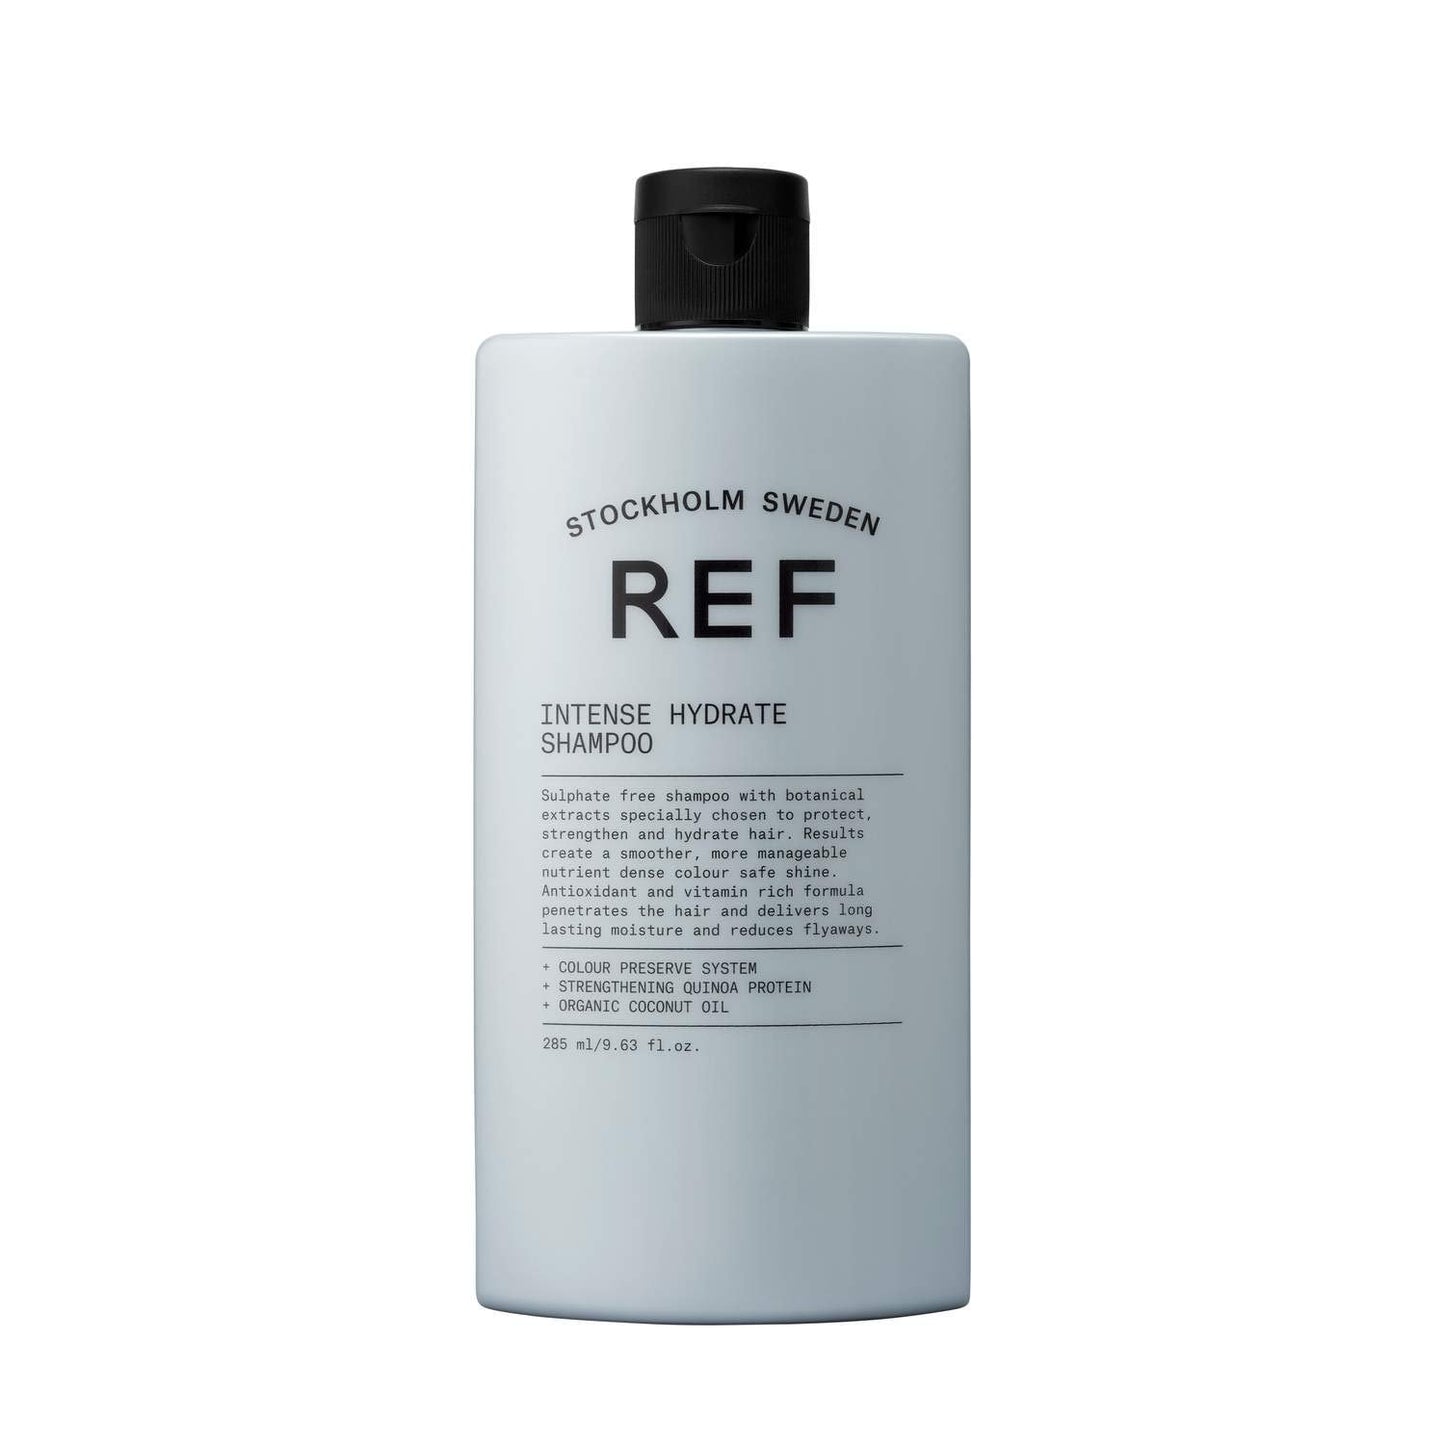 REF Reference of Sweden Intense Hydrate Shampoo 9.63 oz | Reference of Sweden